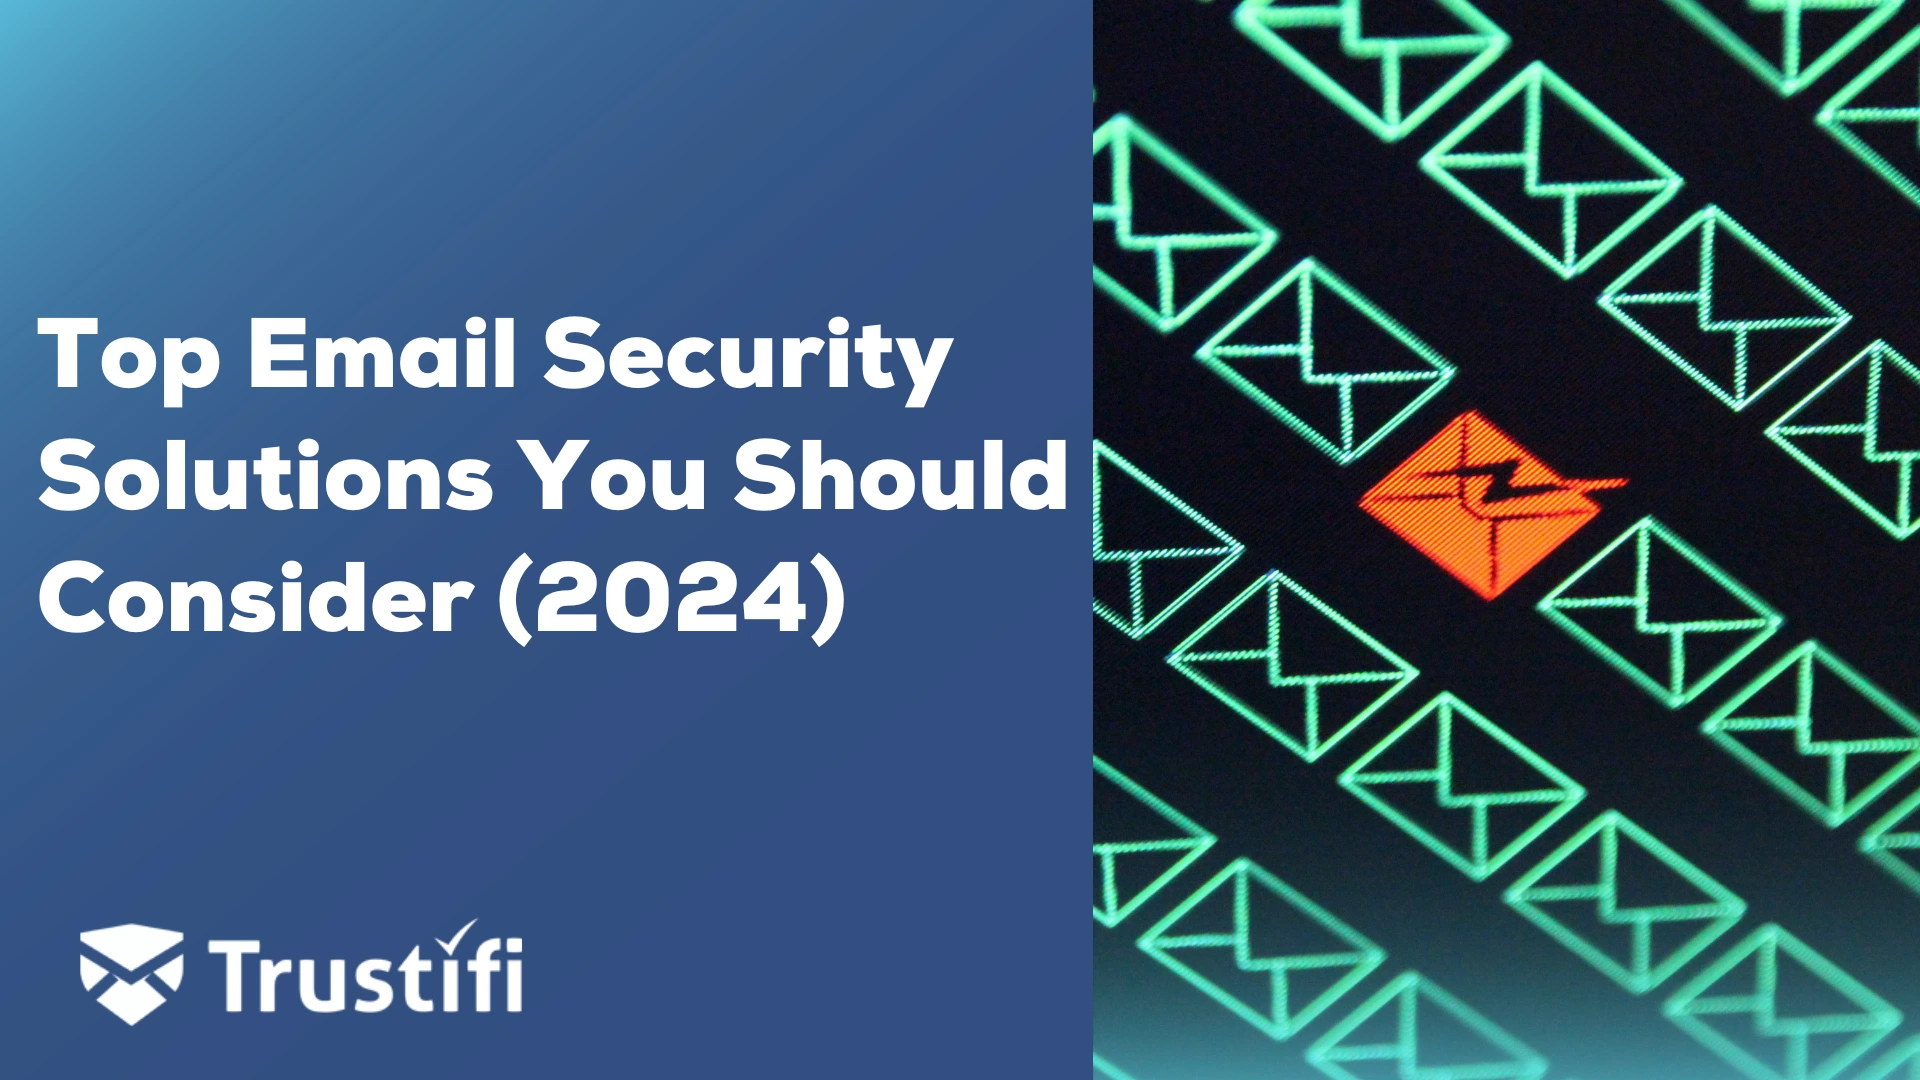 Top Email Security Solutions You Should Consider